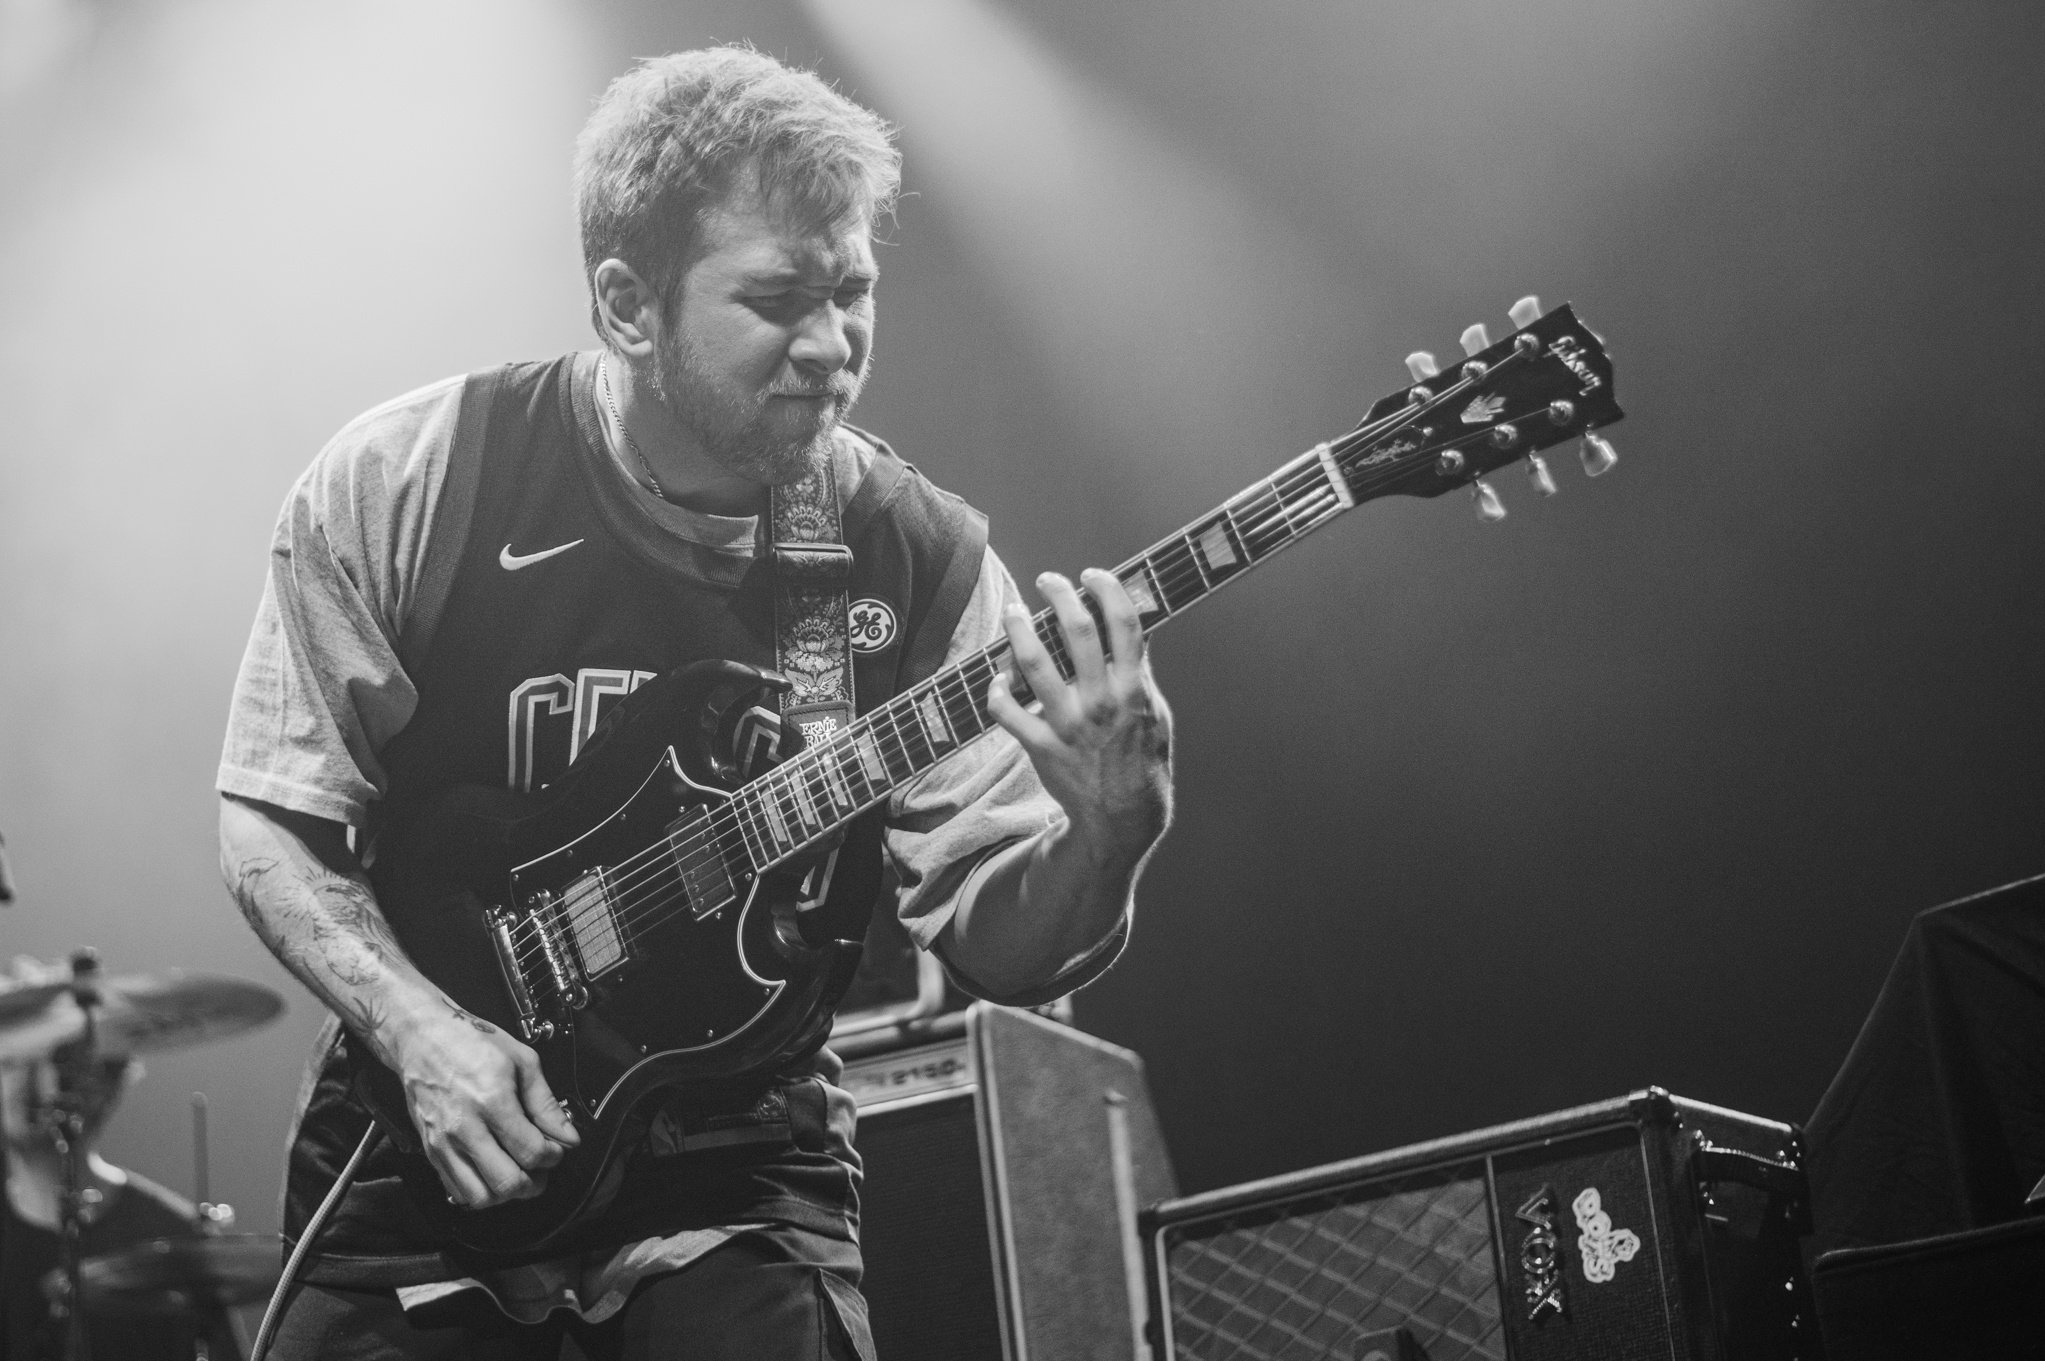 PHOTOS: Royal Blood, Cleopatrick in Boston, MA New England Sounds 2050x1370